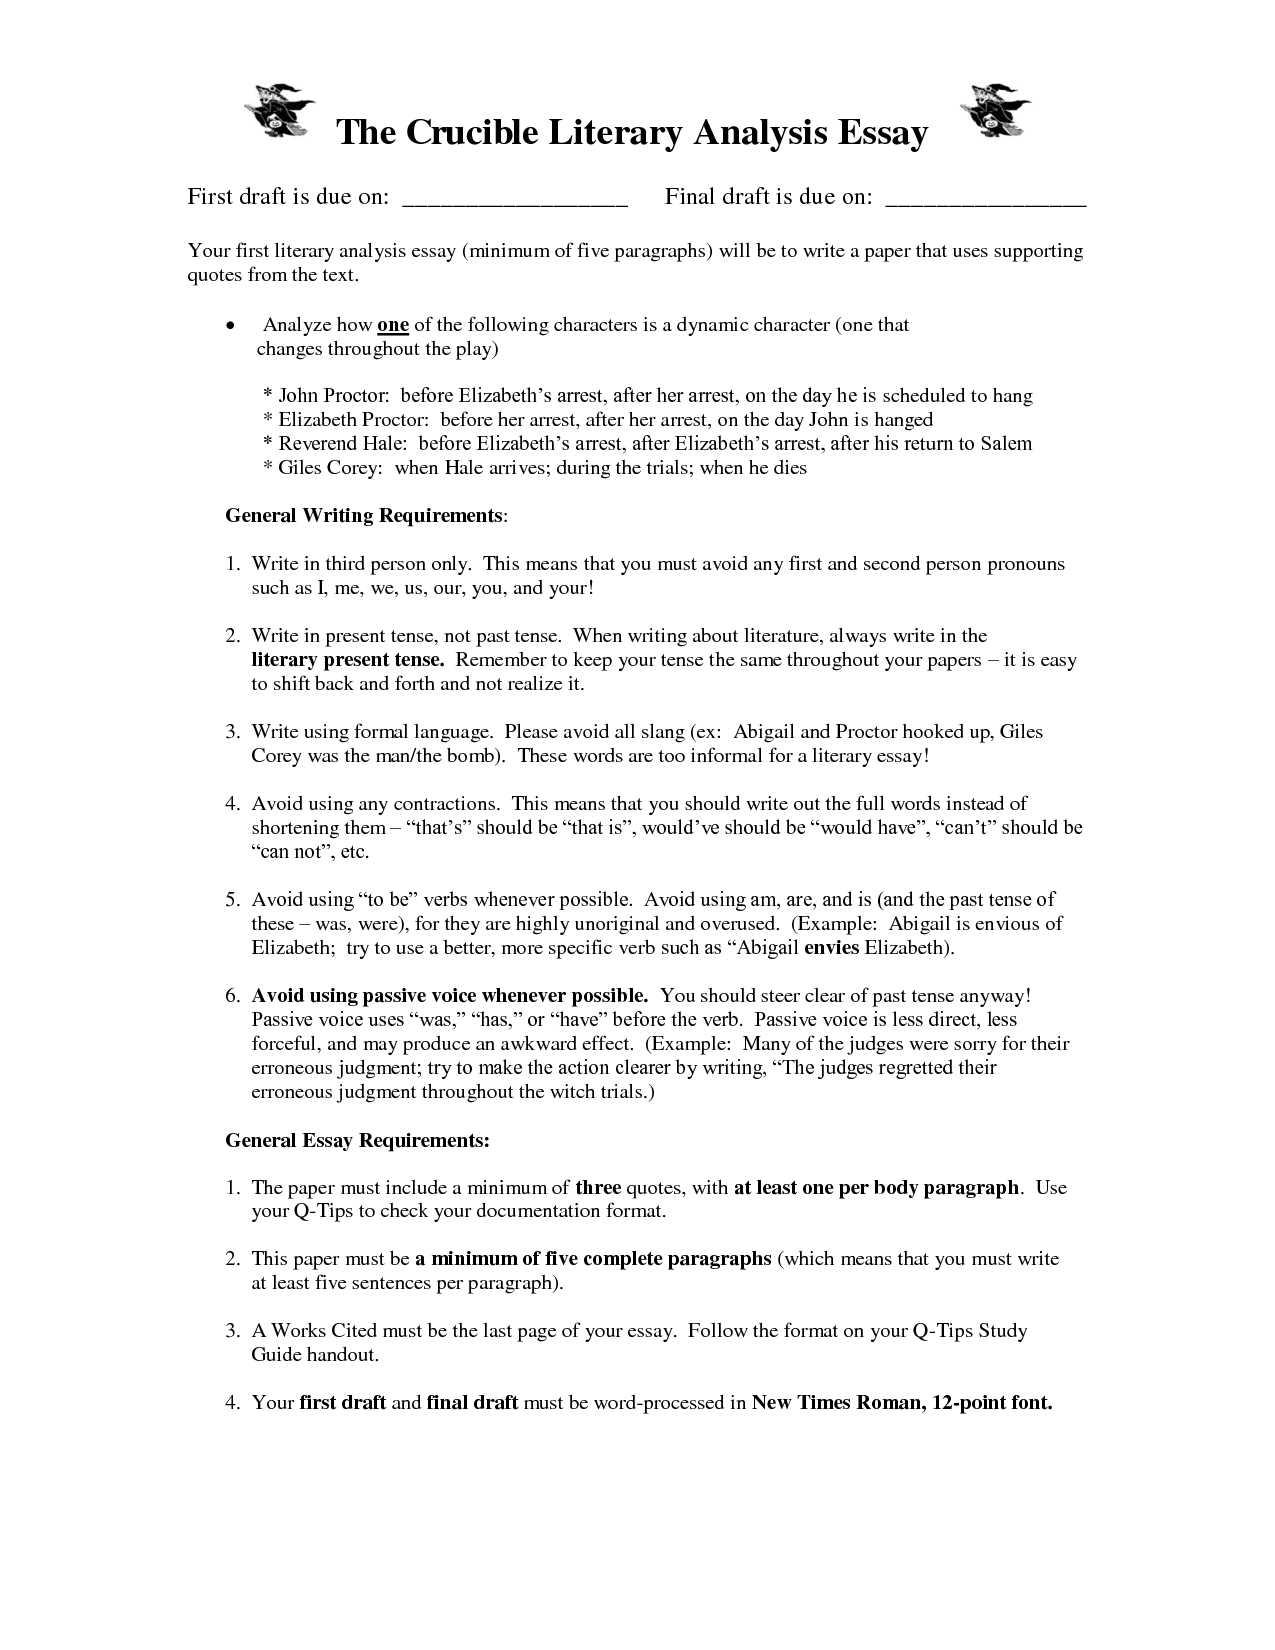 The Crucible Character Analysis Worksheet or the Crucible Character Worksheet